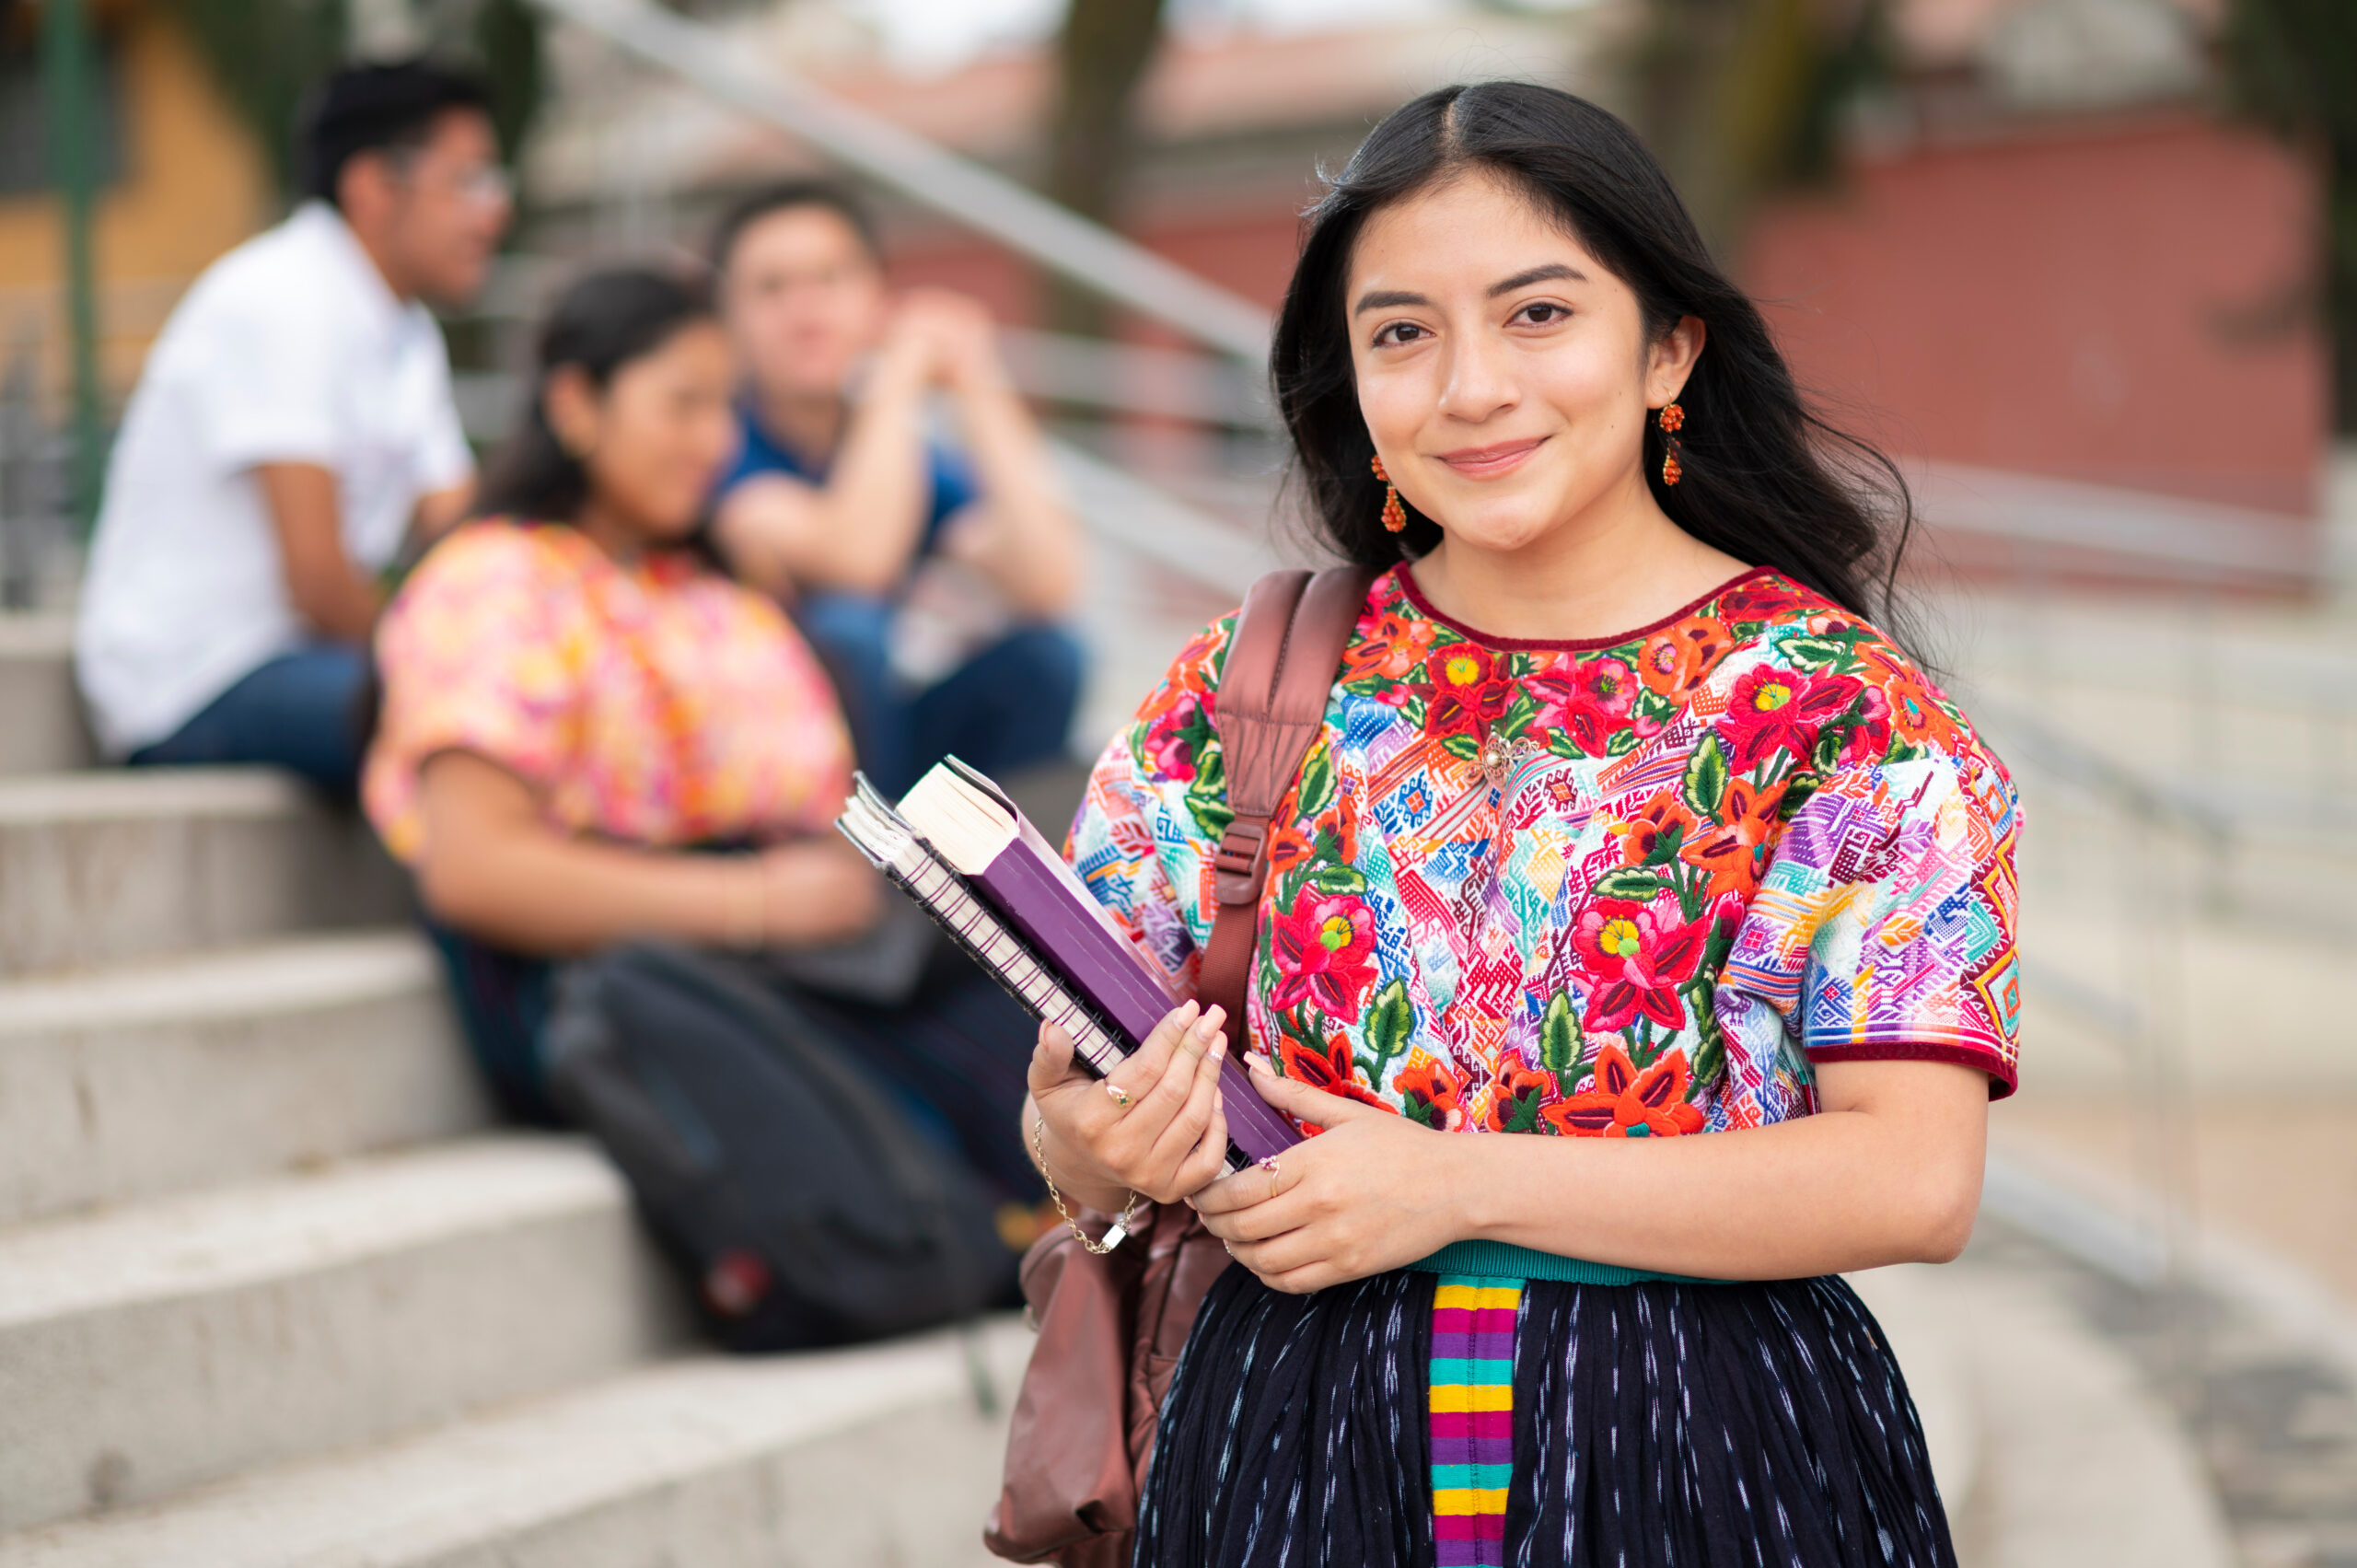 Portrait Of A femme Indigenous Latin American College Student With Books In Hands and slight smile